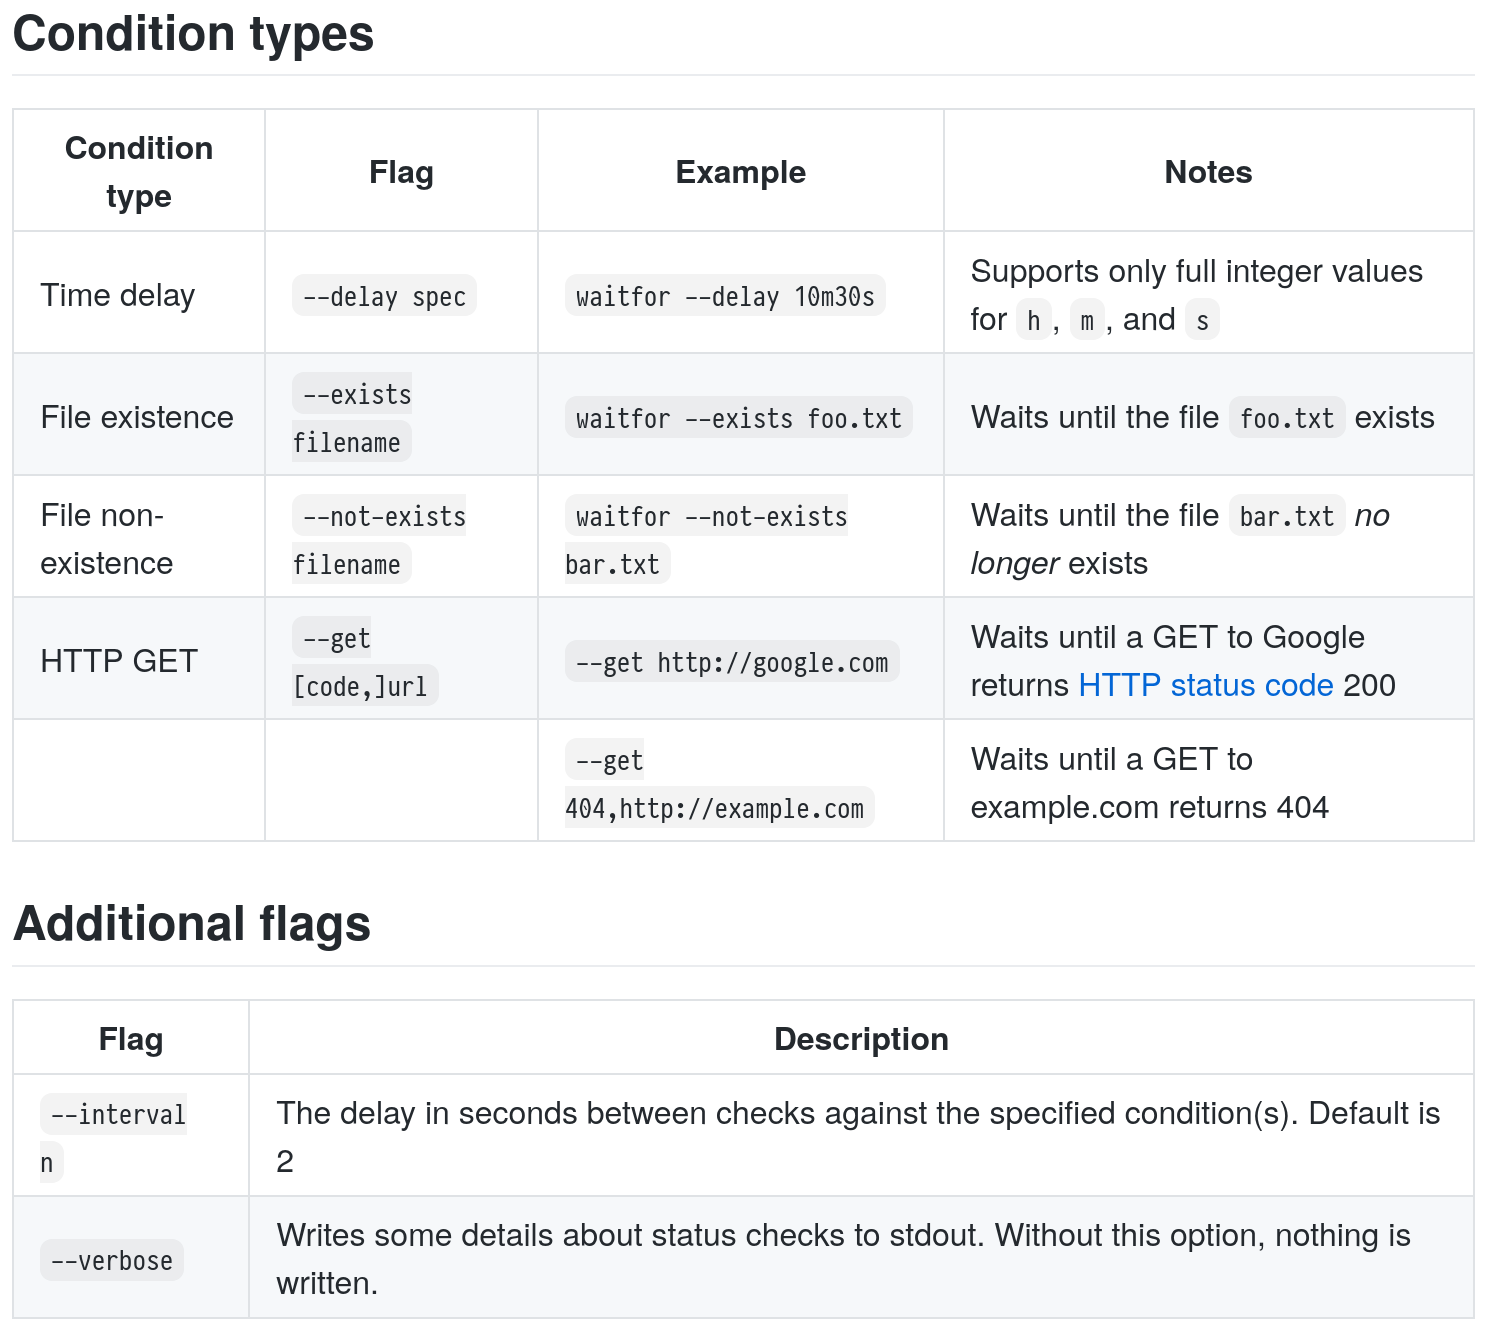 Screenshot of the waitfor documentation showing the various condition flags it accepts.